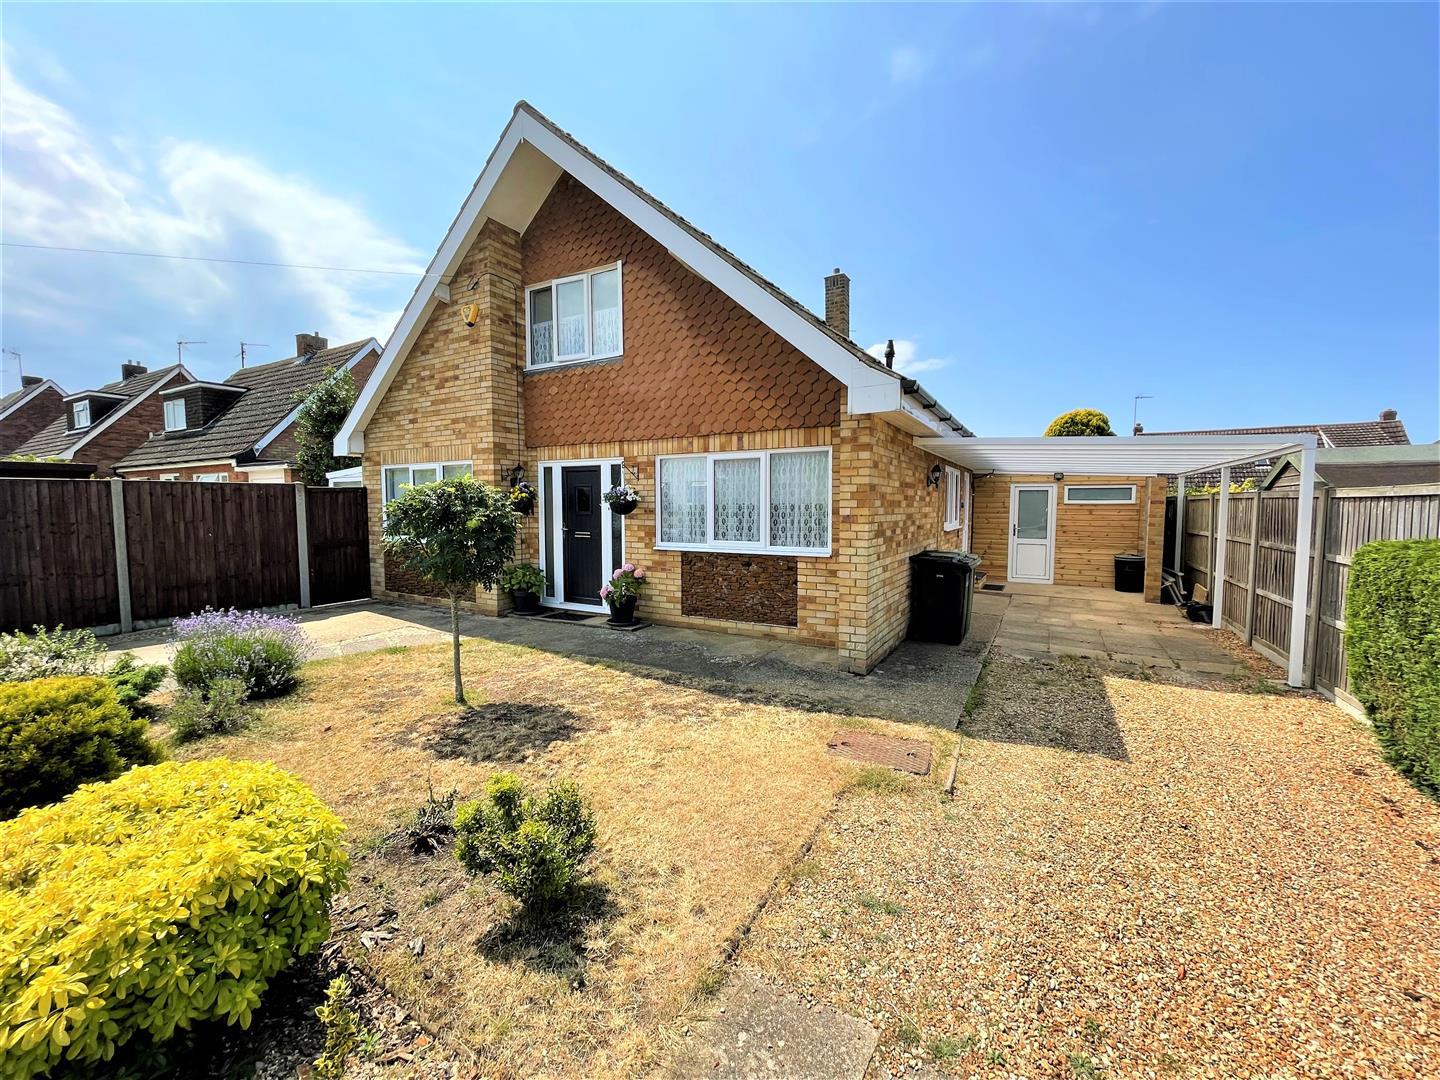 4 bed detached house for sale in Valley Rise, King's Lynn - Property Image 1